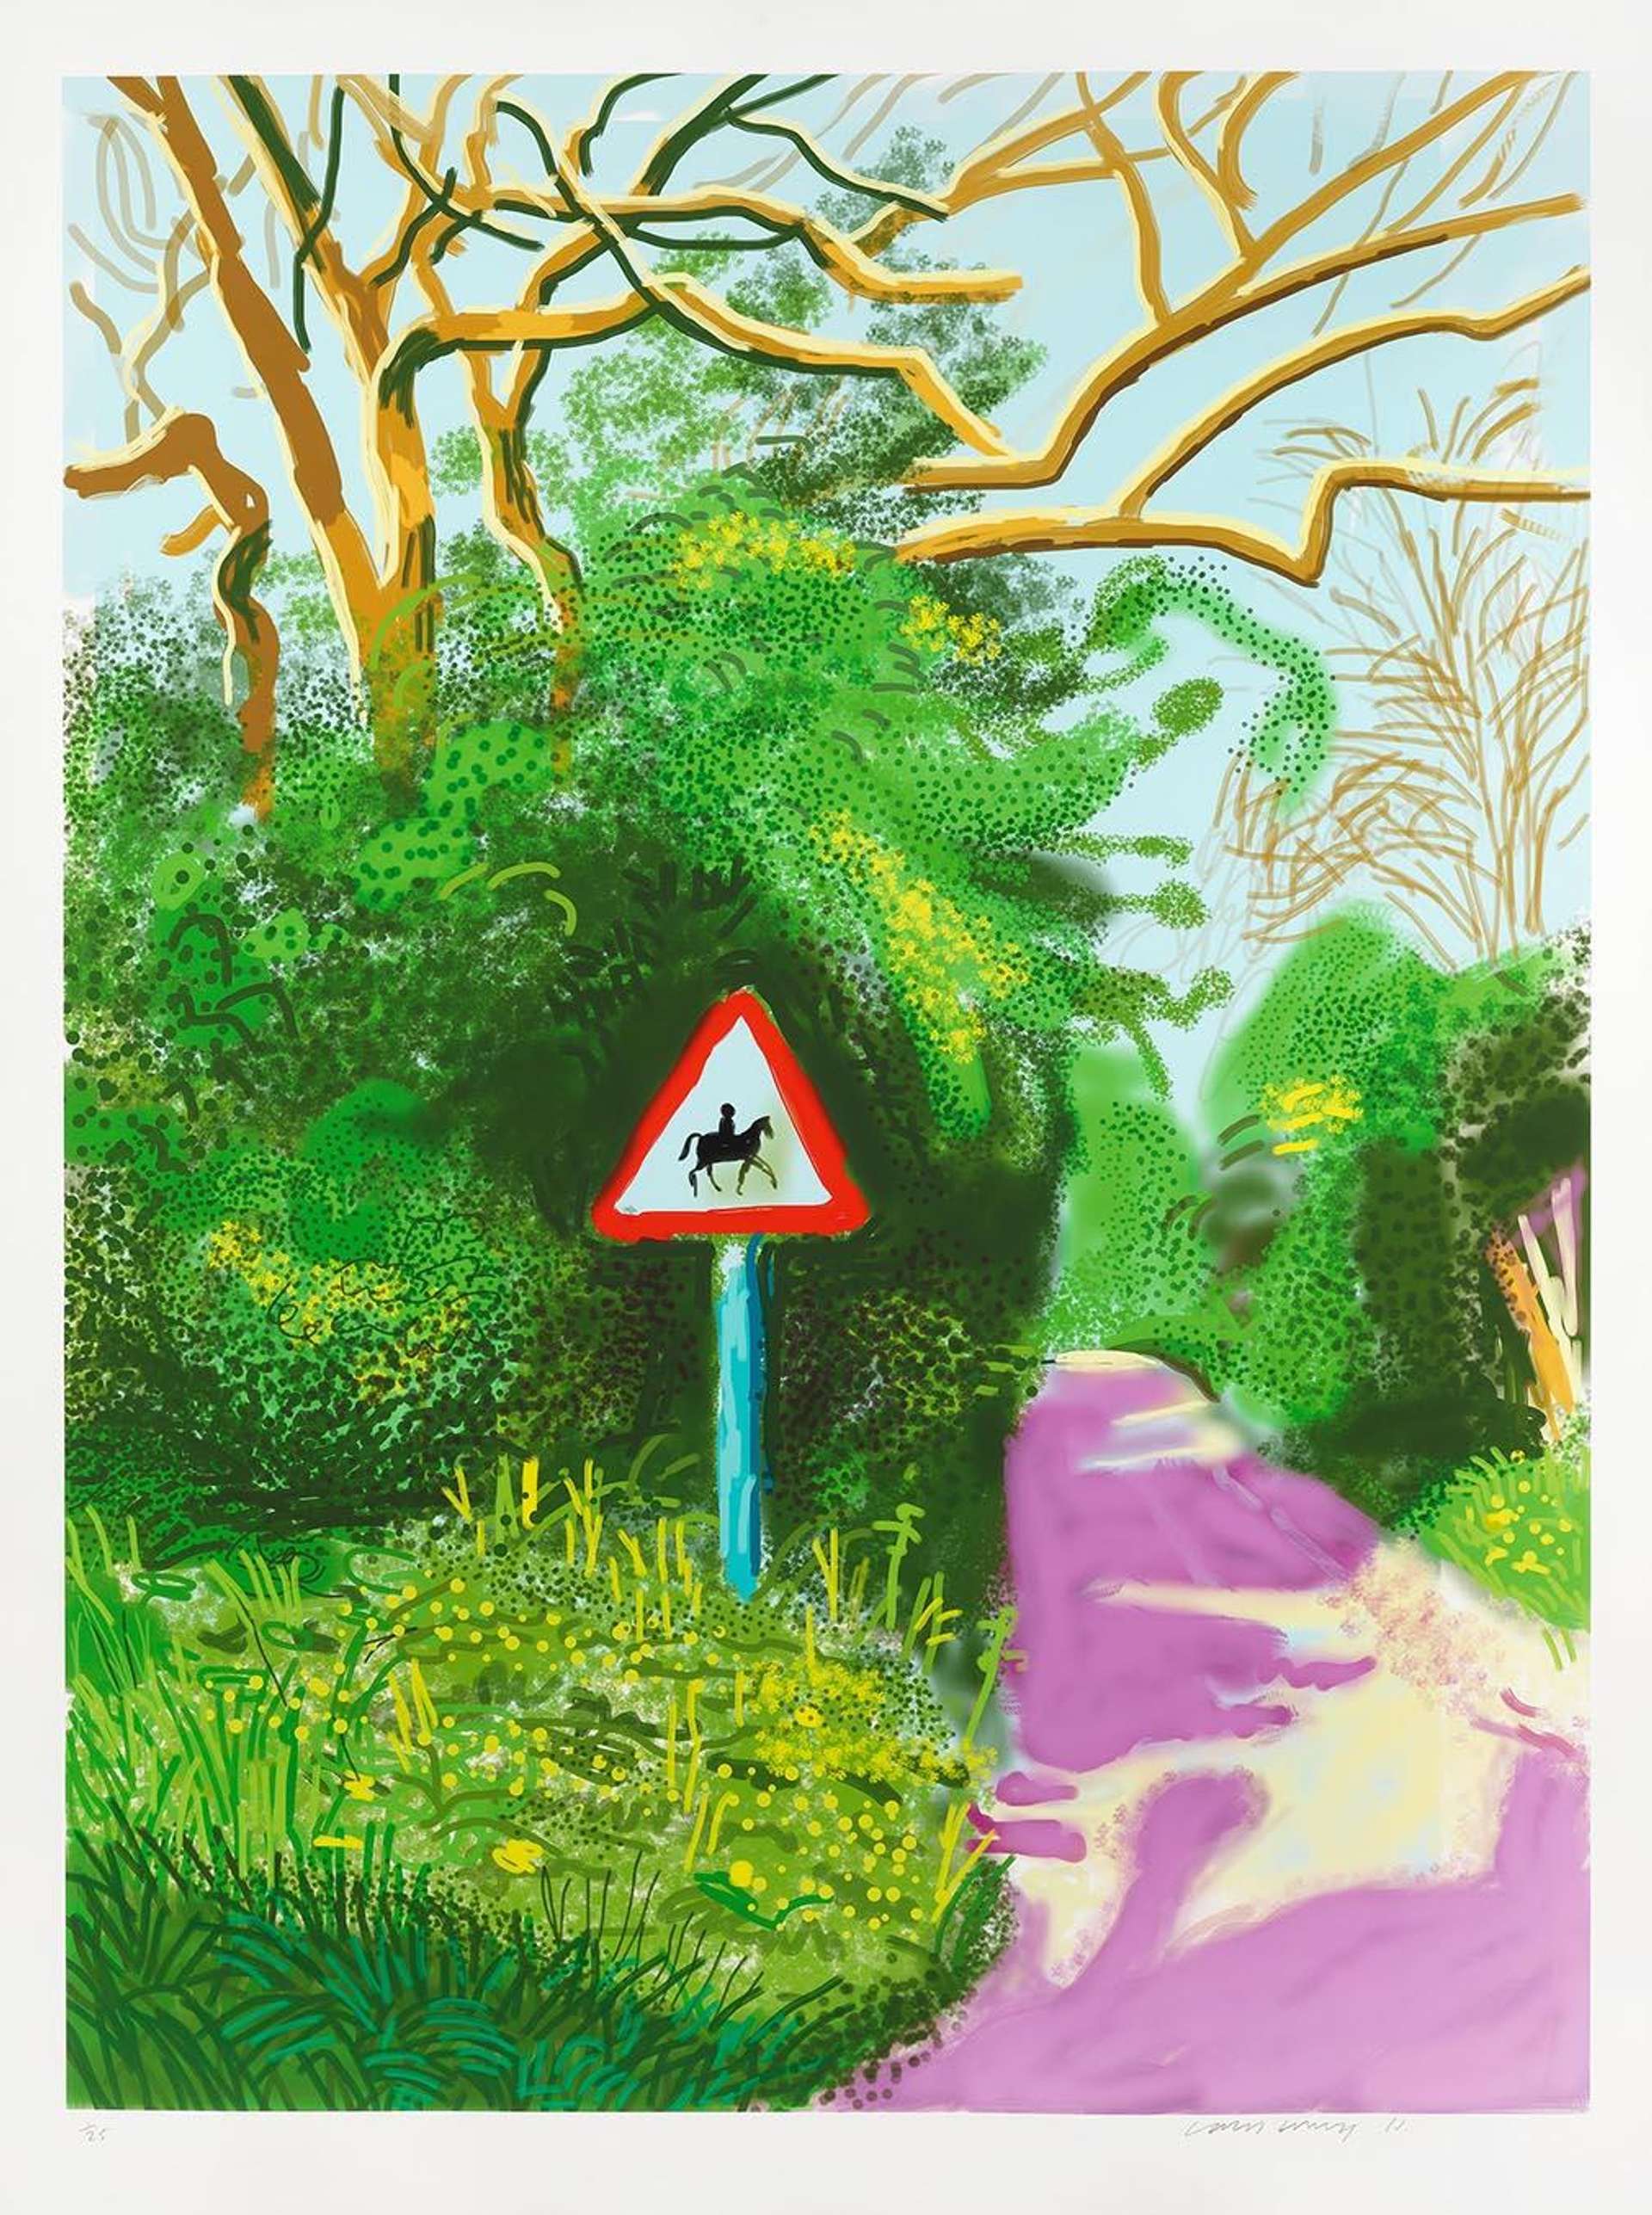 A nature view by David Hockney, showing a horse crossing sign against a green background and a pink walking path.